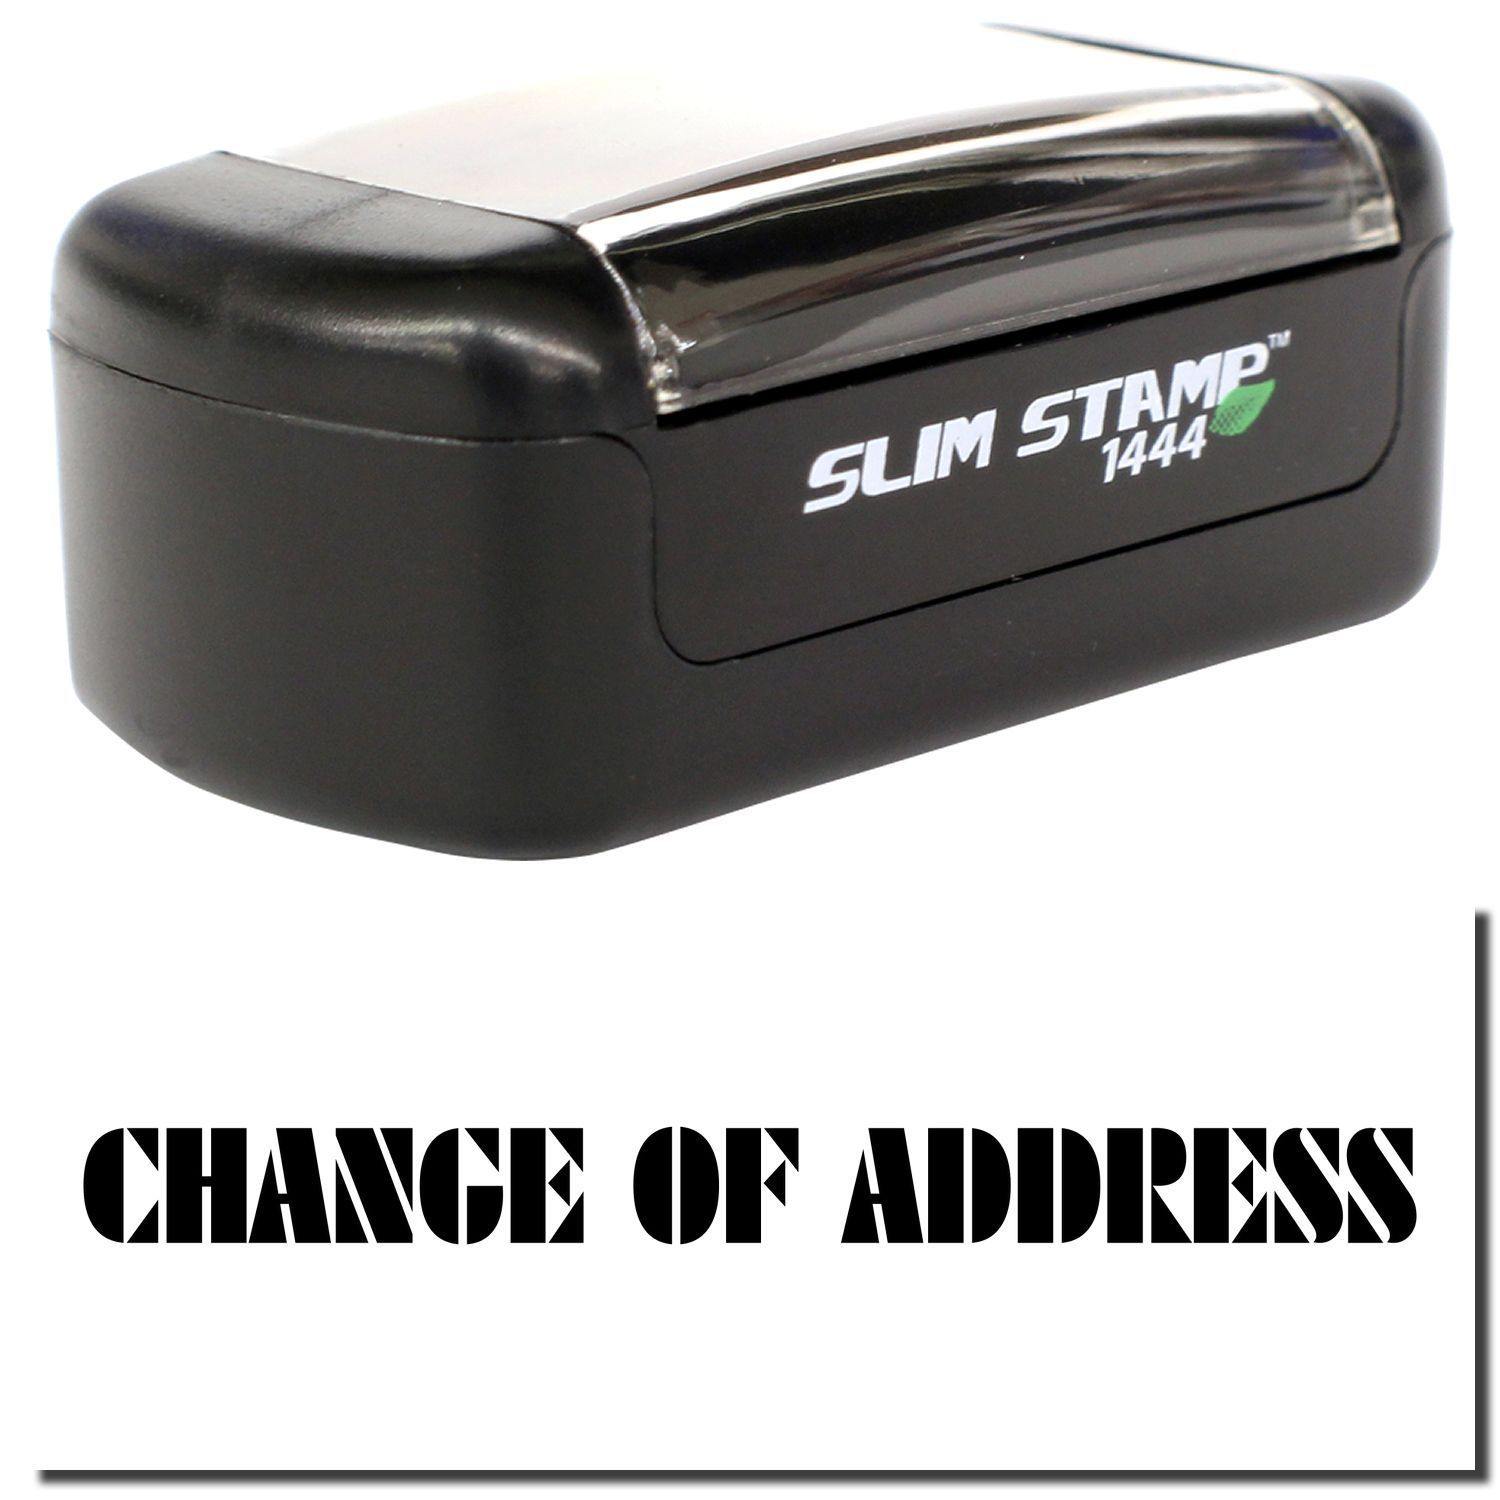 A stock office pre-inked stamp with a stamped image showing how the text "CHANGE OF ADDRESS" is displayed after stamping.